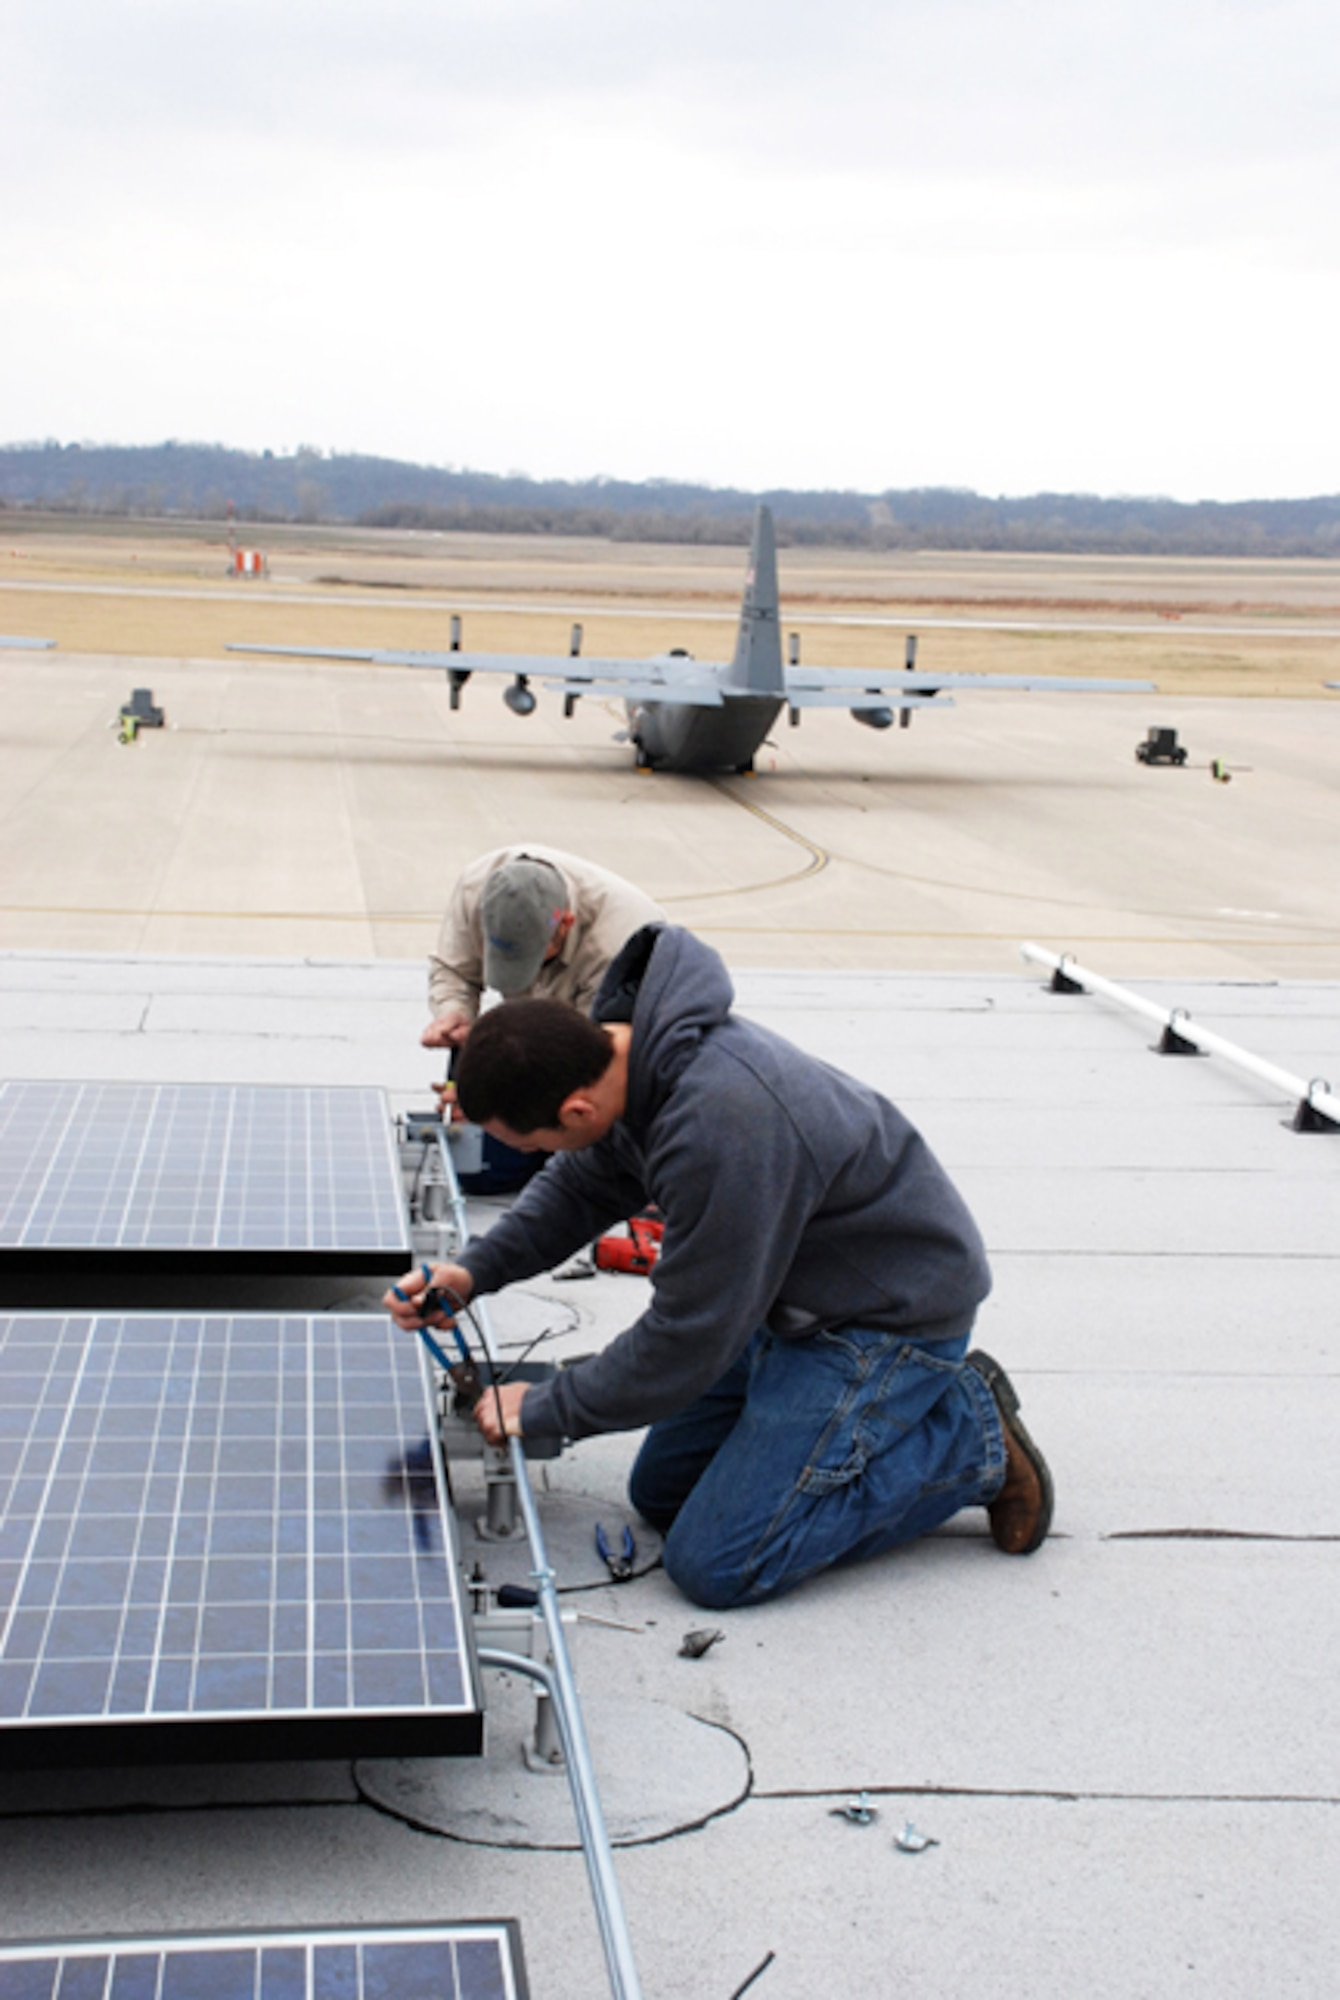 Solar panels were installed on various buildings at the 139th AW. (U.S. Air Force photo by Major Barb Denny) (RELEASED)